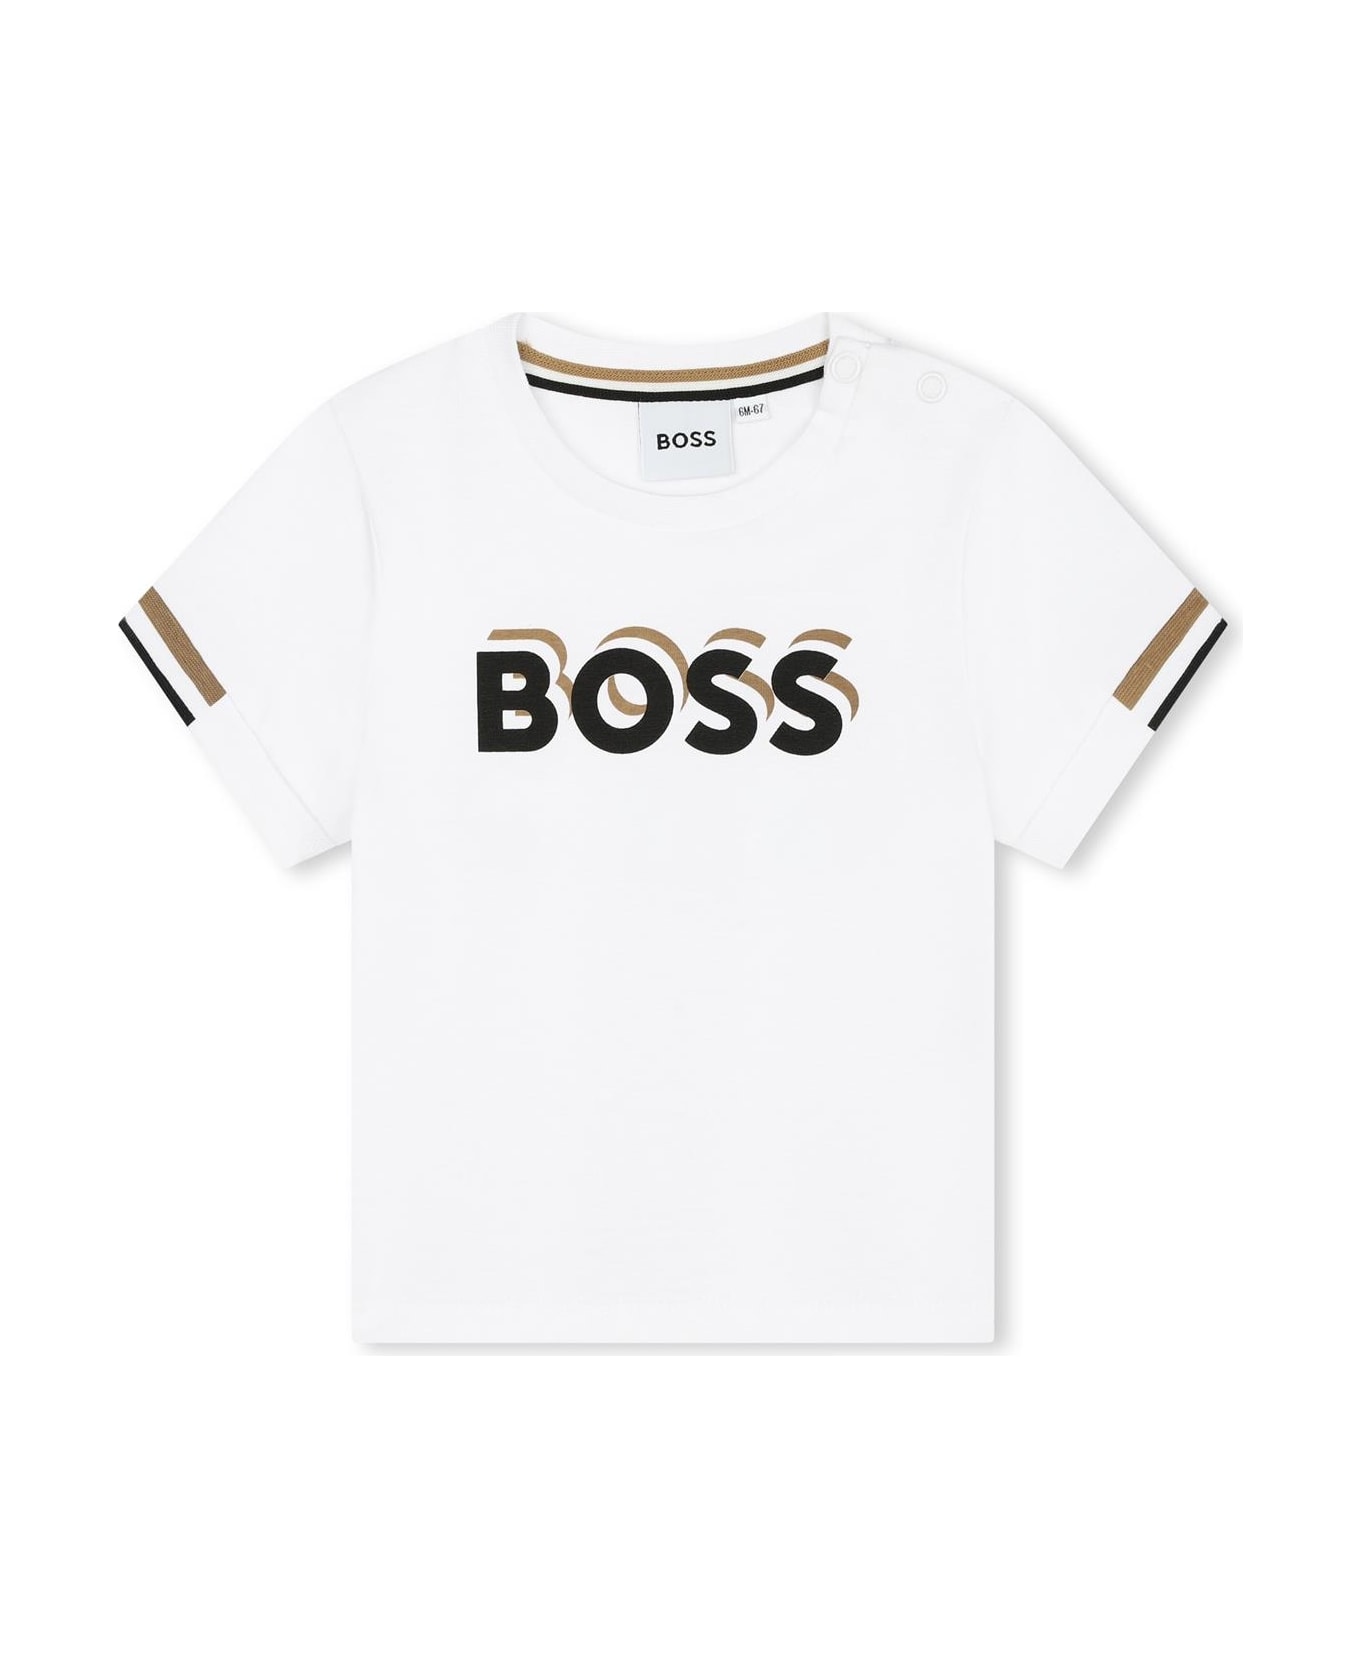 Hugo Boss Printed Top And Shorts Set - Beige ボディスーツ＆セットアップ